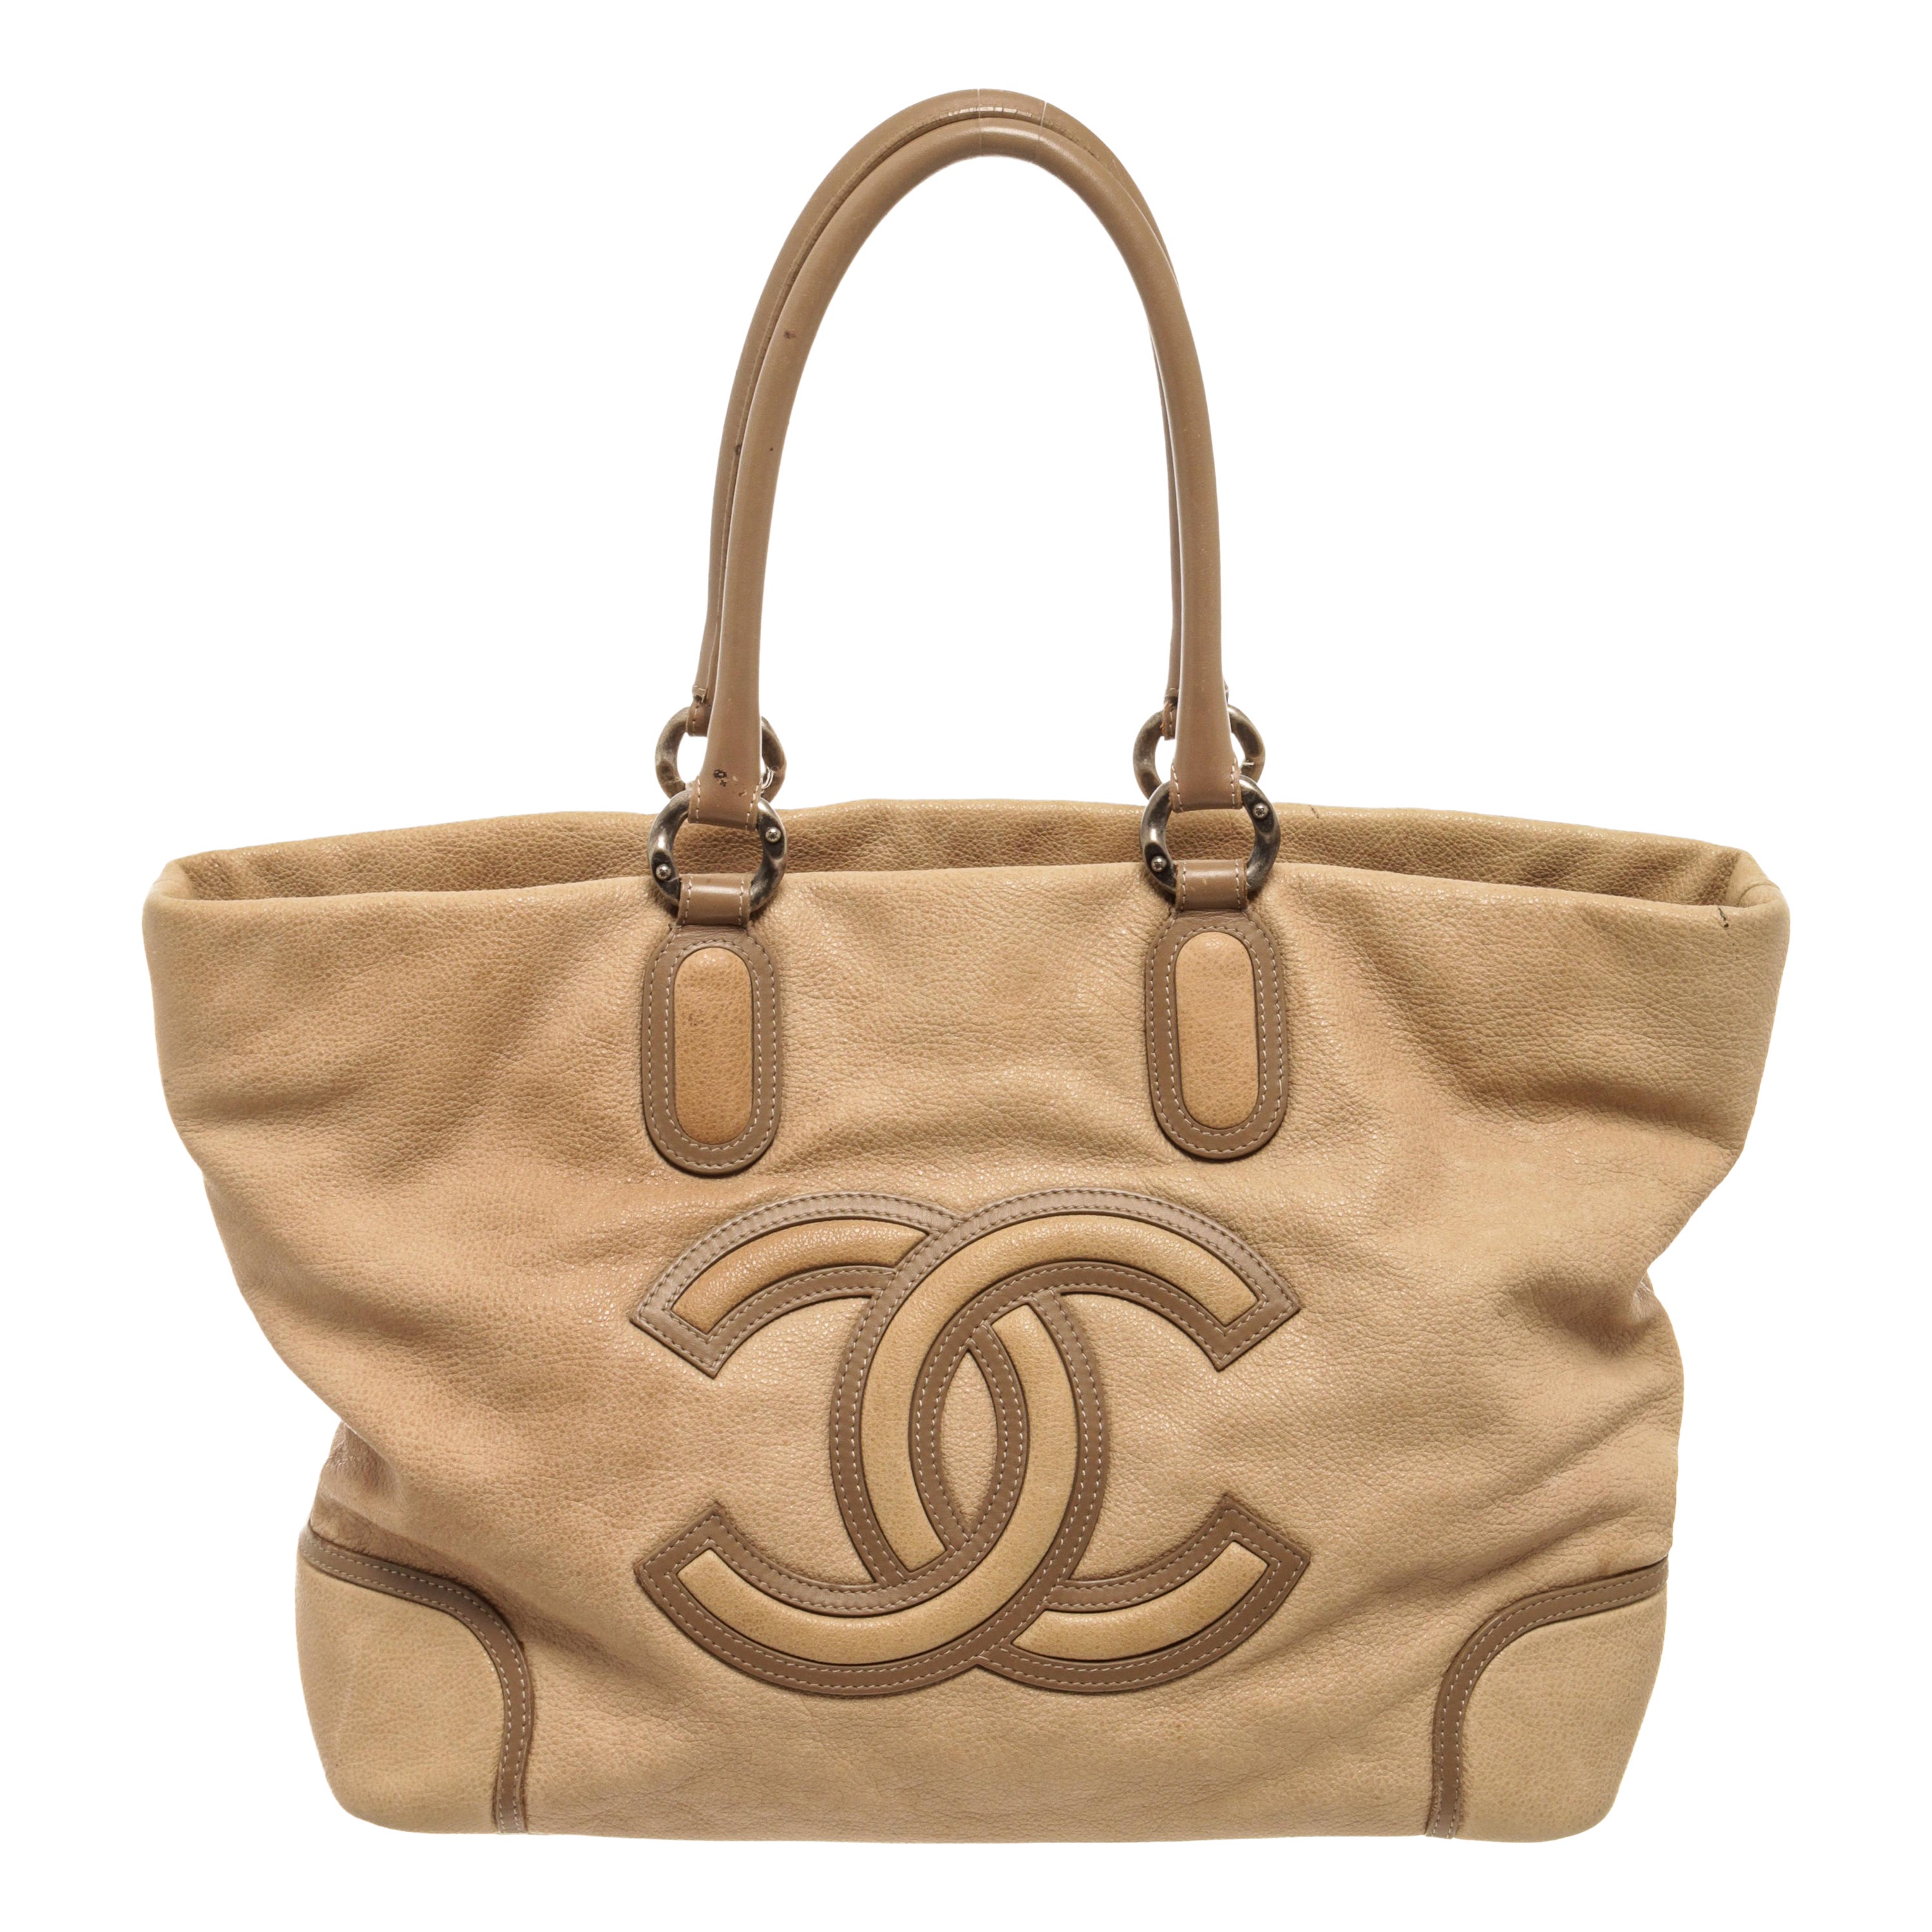 Chanel Beige Caviar Leather CC Cup Tote Bag